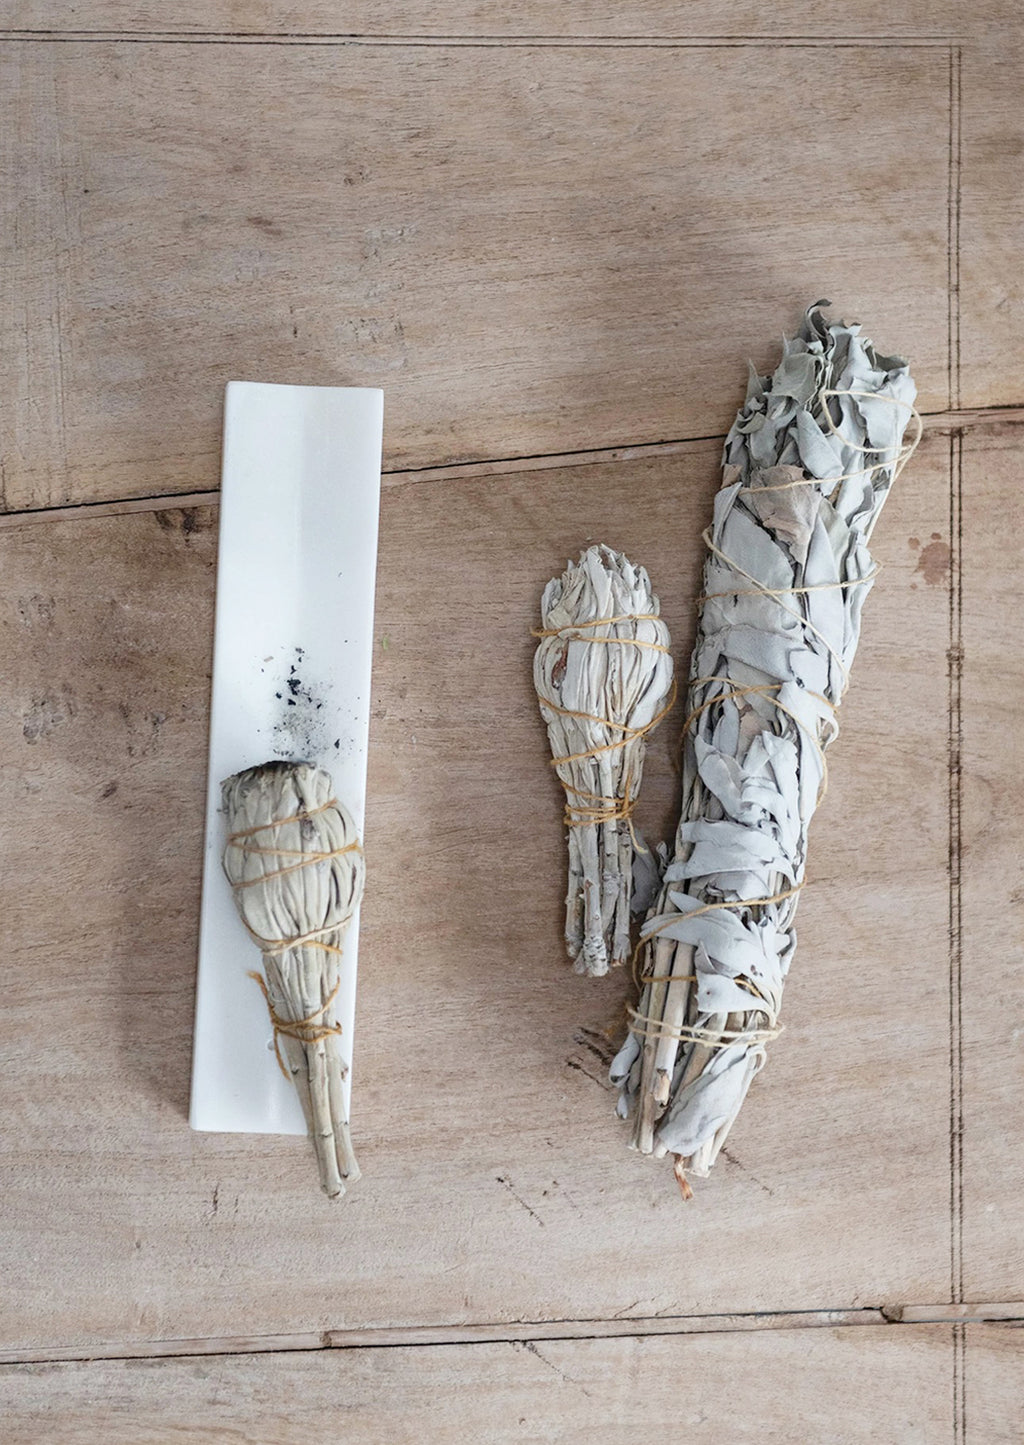 2: A long solid marble incense burner tray, shown with sage smudge bundles.